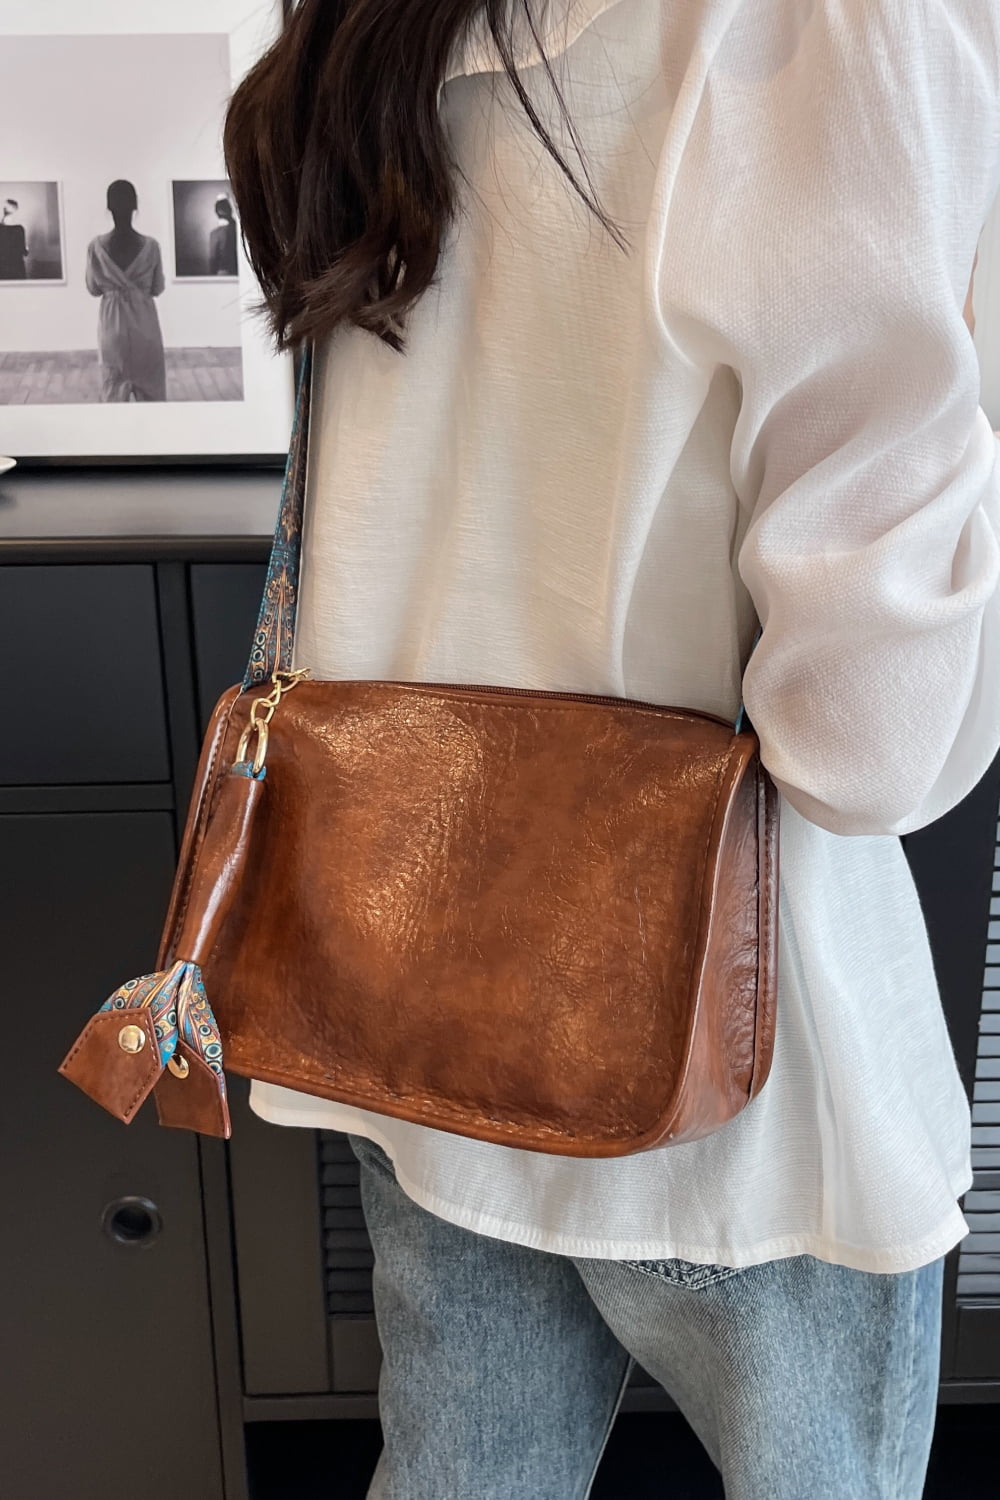 Adored PU Leather Shoulder Bag Additional Options Available